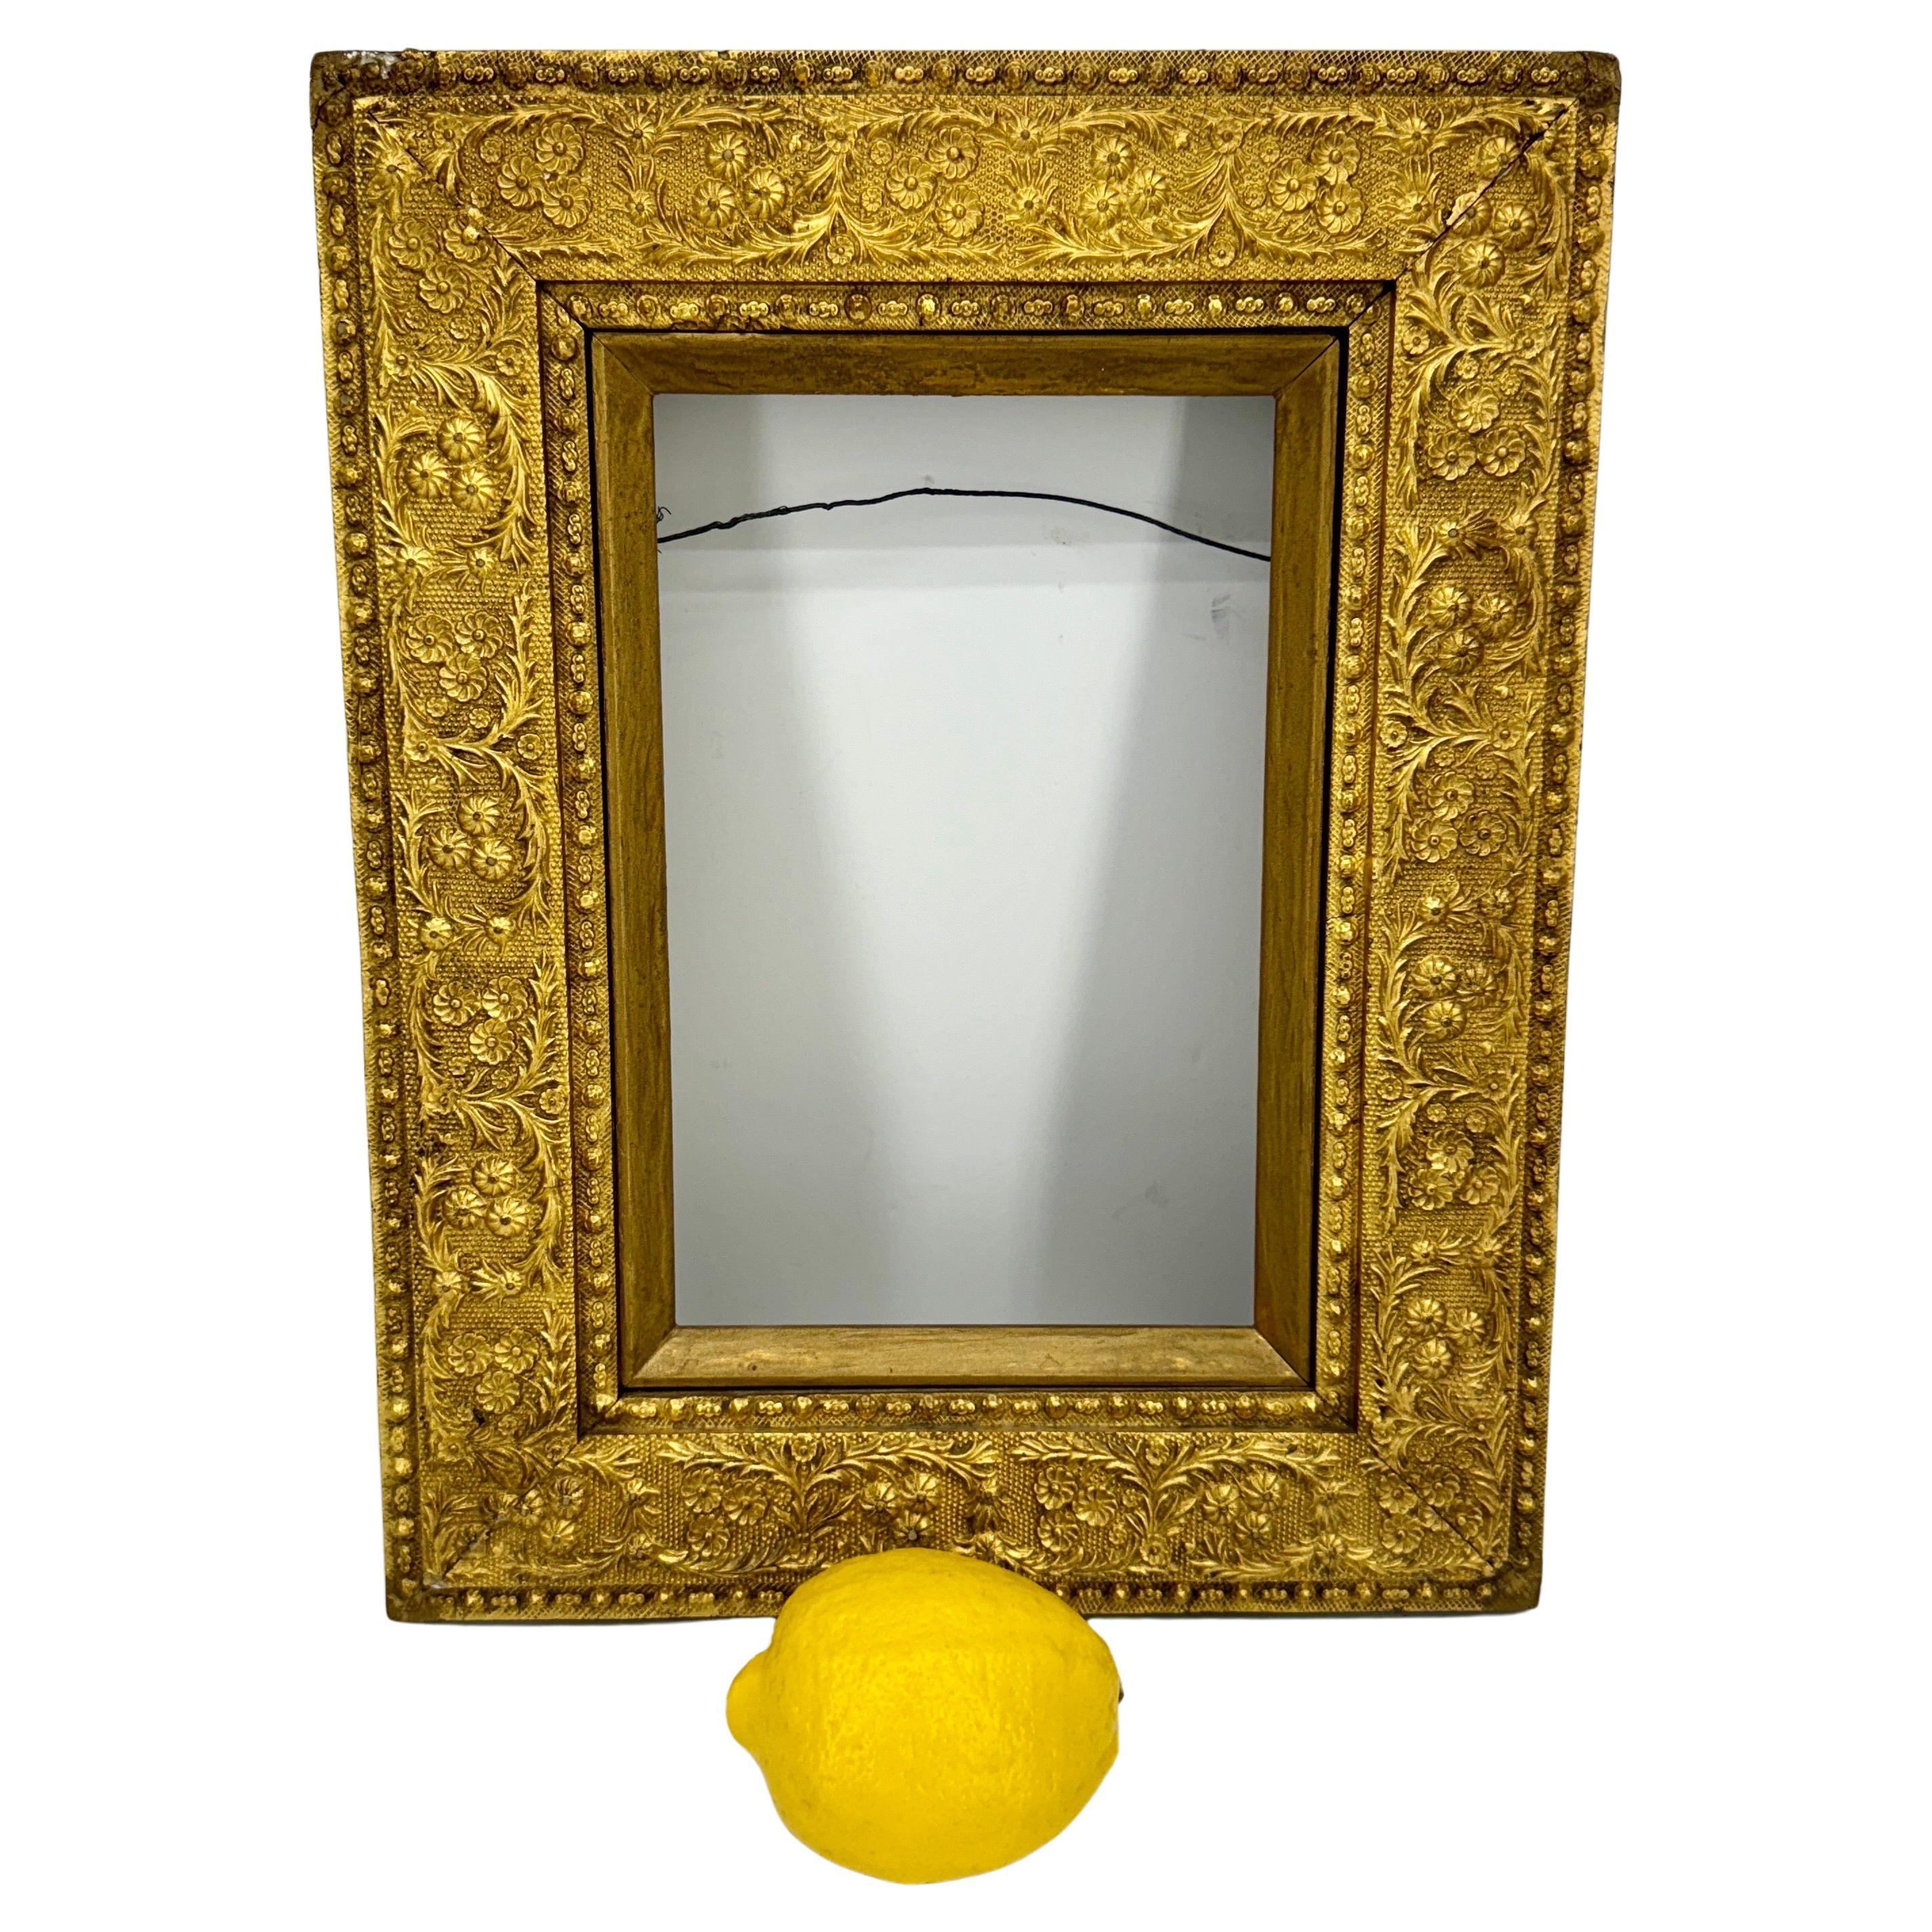 Small Italian Antique 19th Century Rectangular Gilded Frame In Good Condition For Sale In Haddonfield, NJ